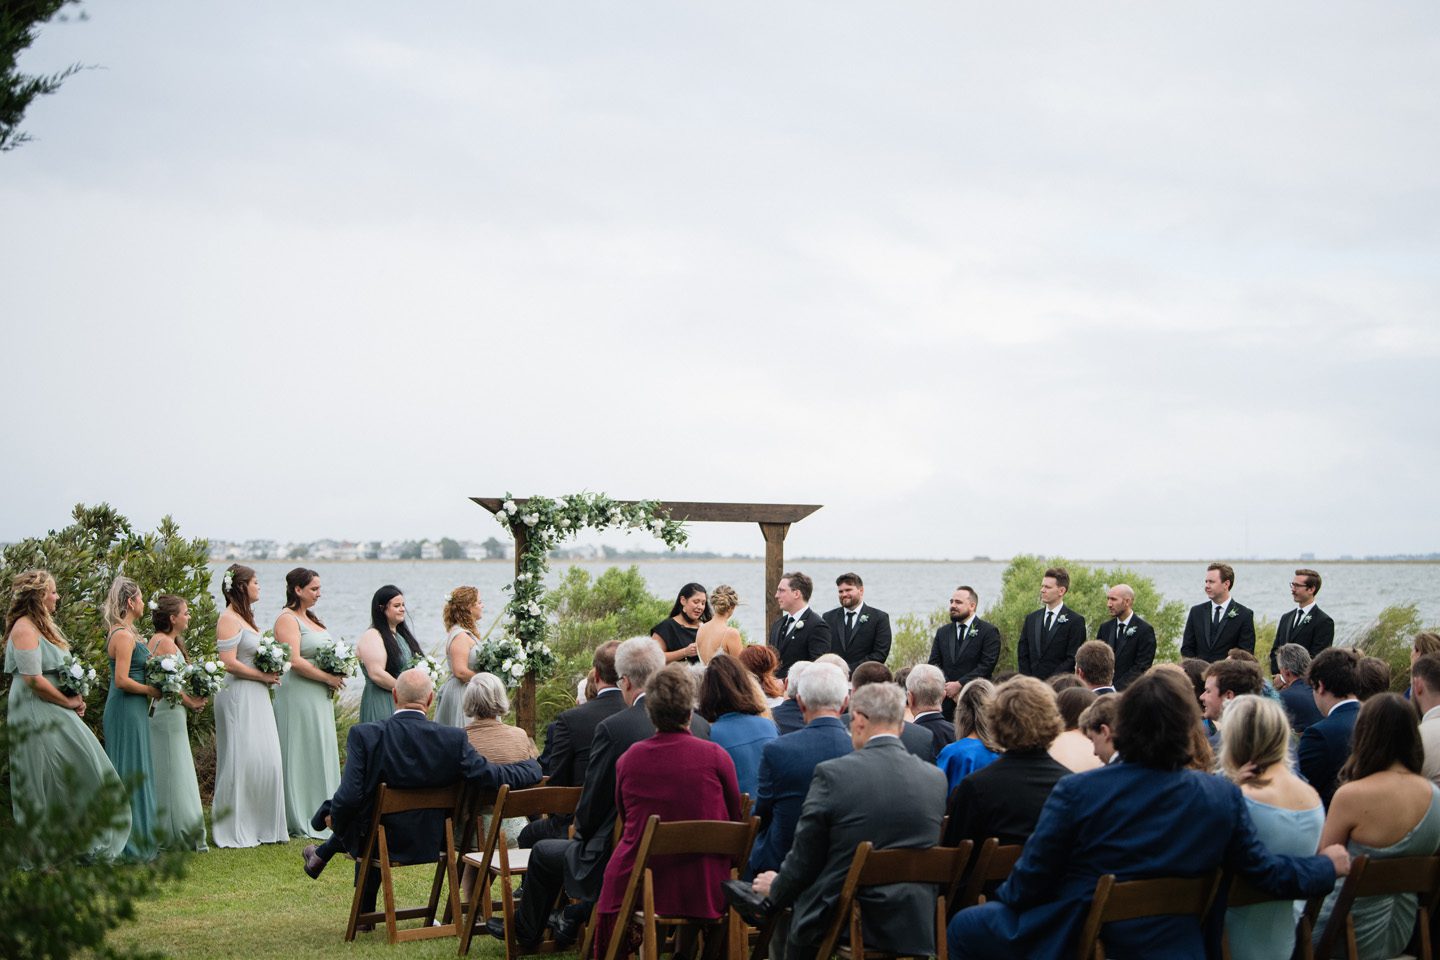 Outer Banks wedding at Festival Park in Manteo